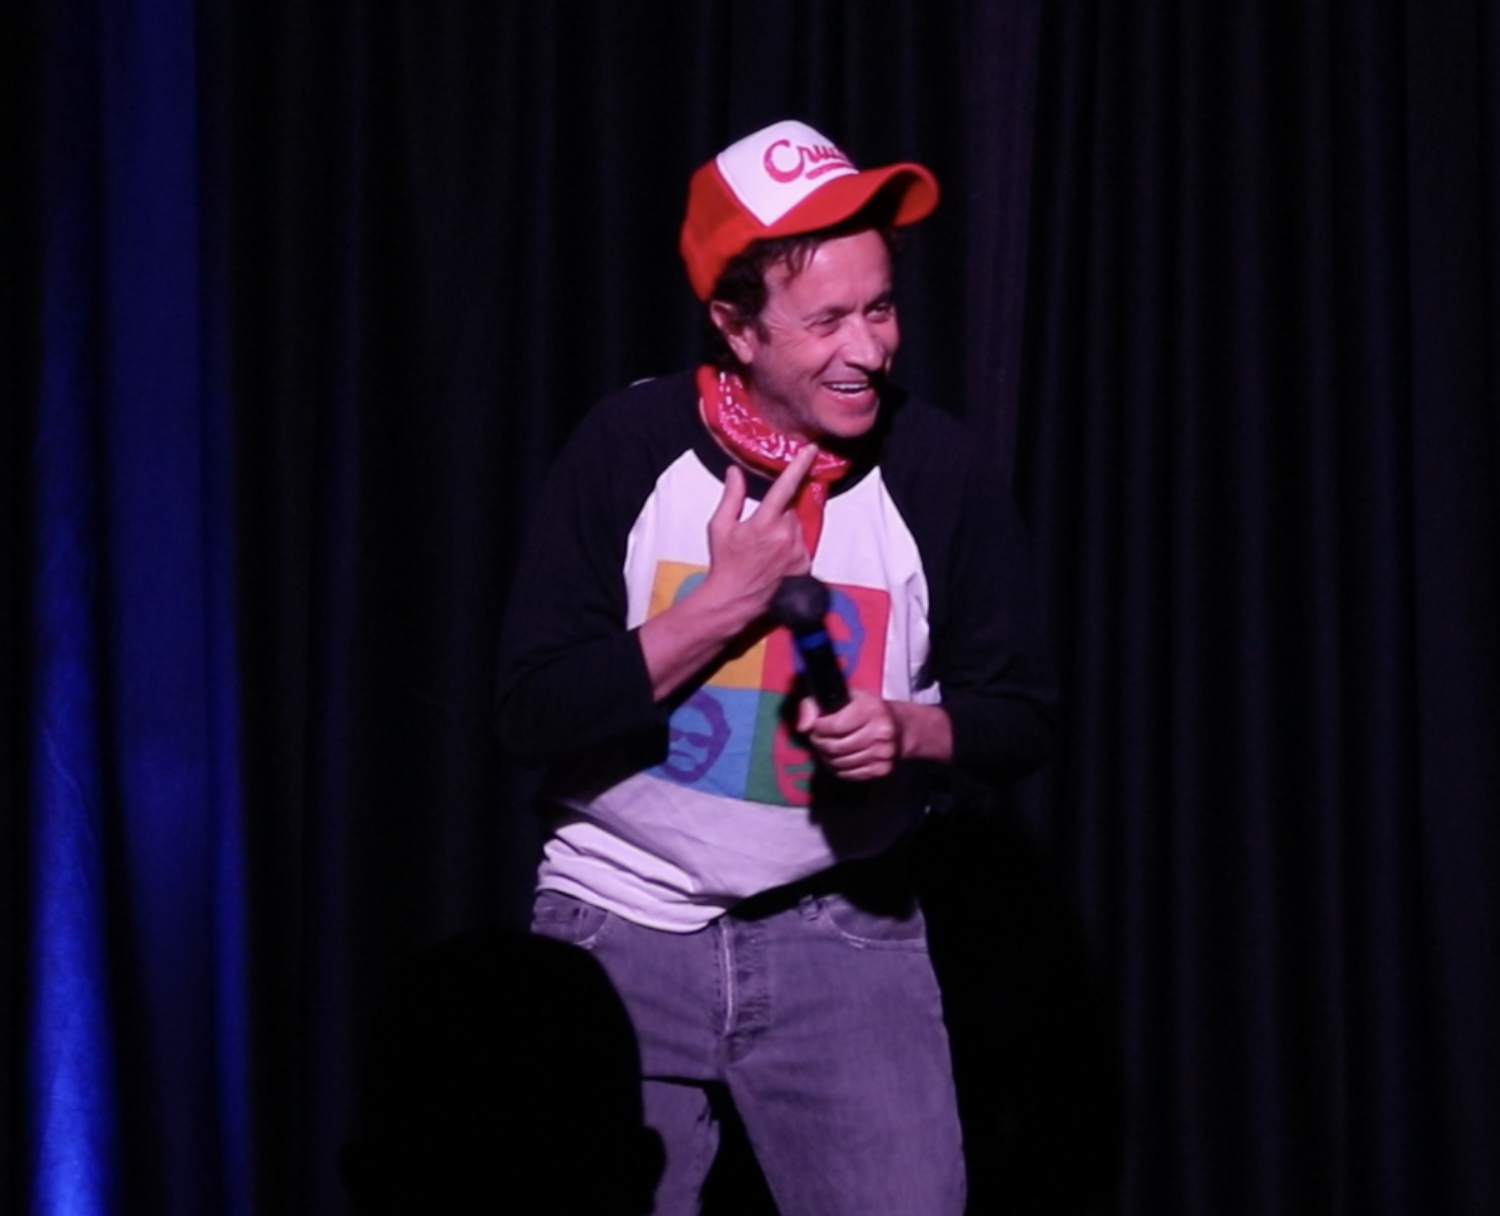 Pauly Shore drops into Delirious Comedy Club for some crazy fun.